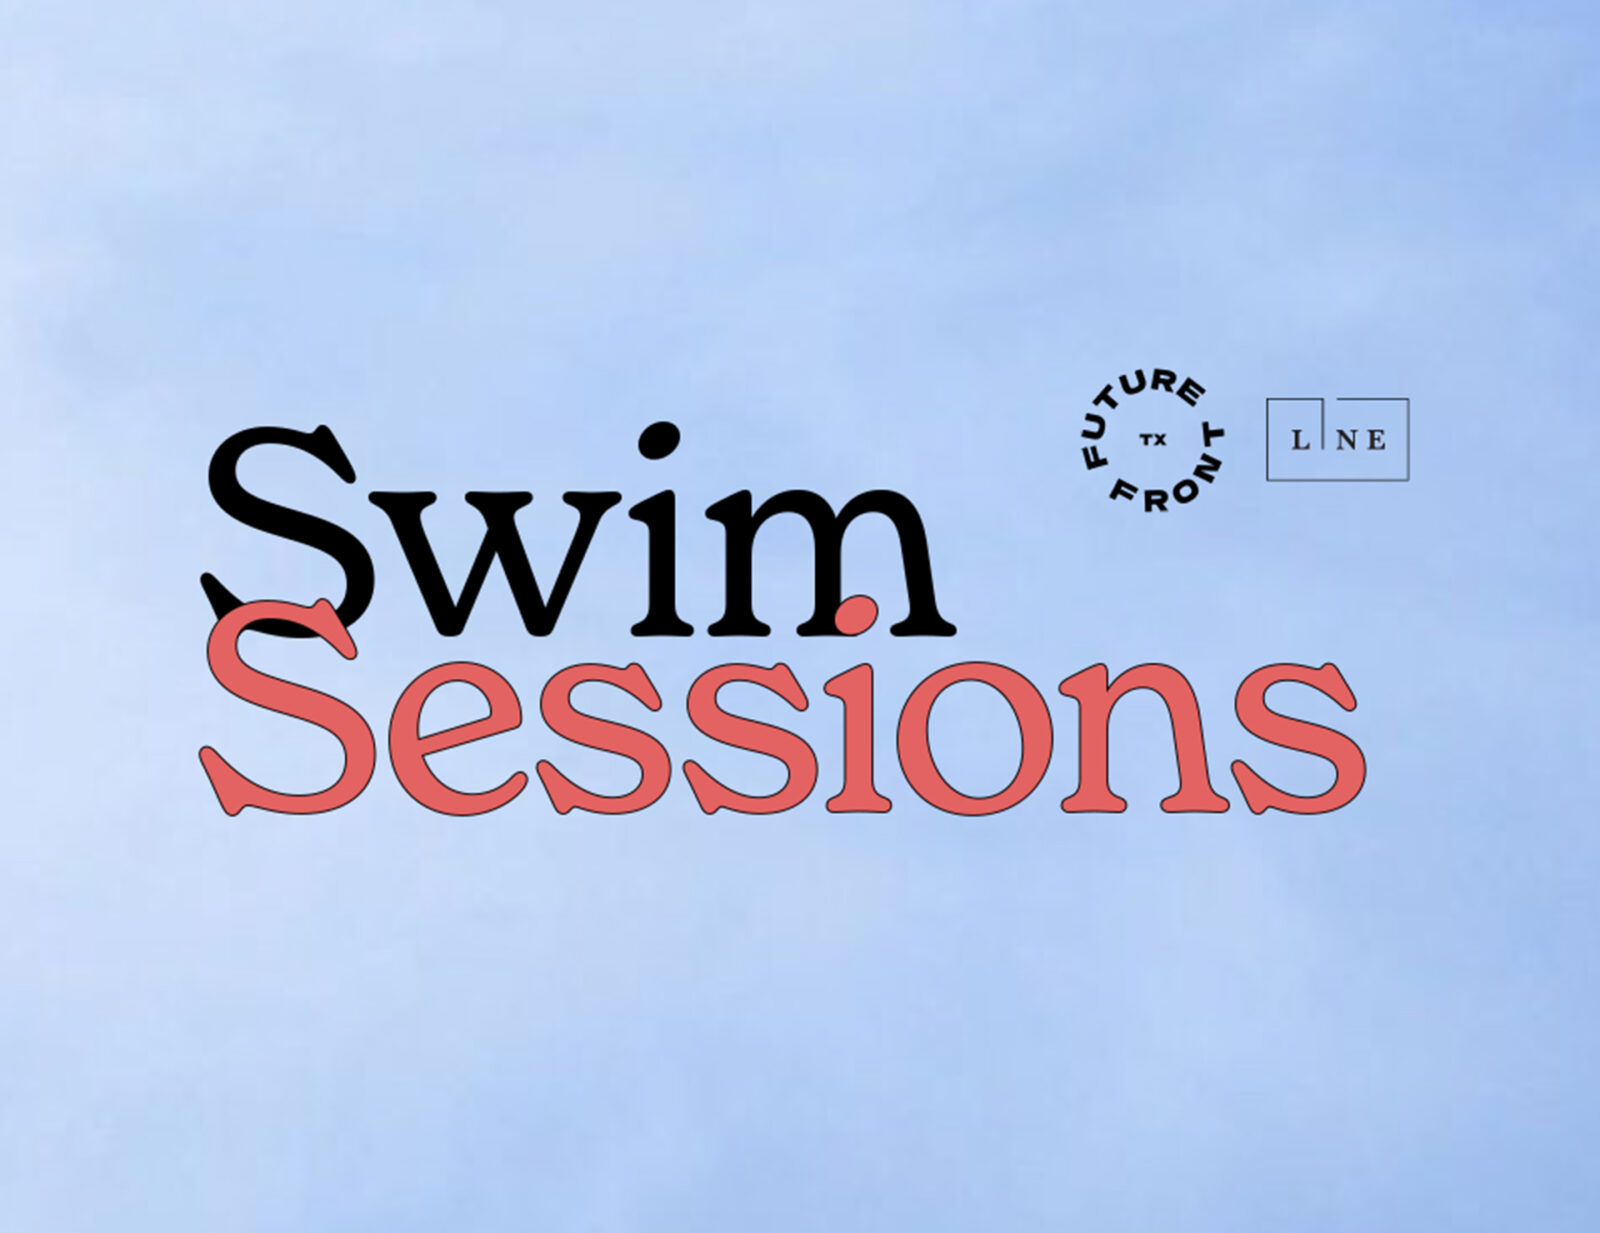 Swim Sessions Flyer in blue